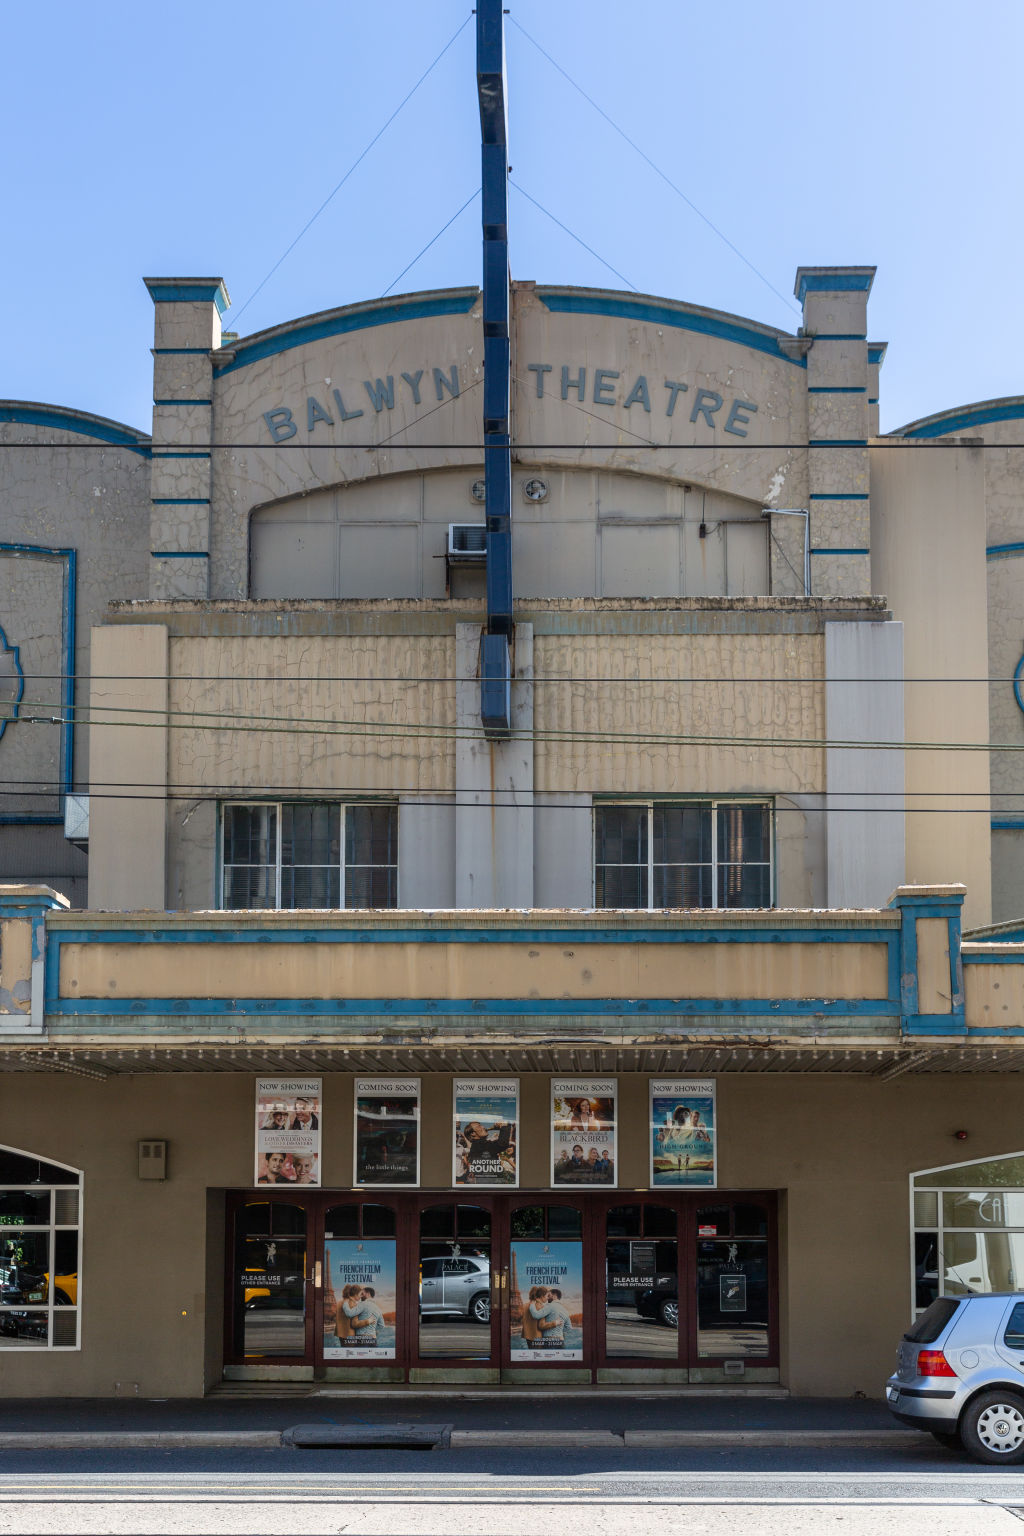 The Palace Balwyn cinema is only a few hundred metres outside Deepdene's boundary. Photo: Eliana Schoulal